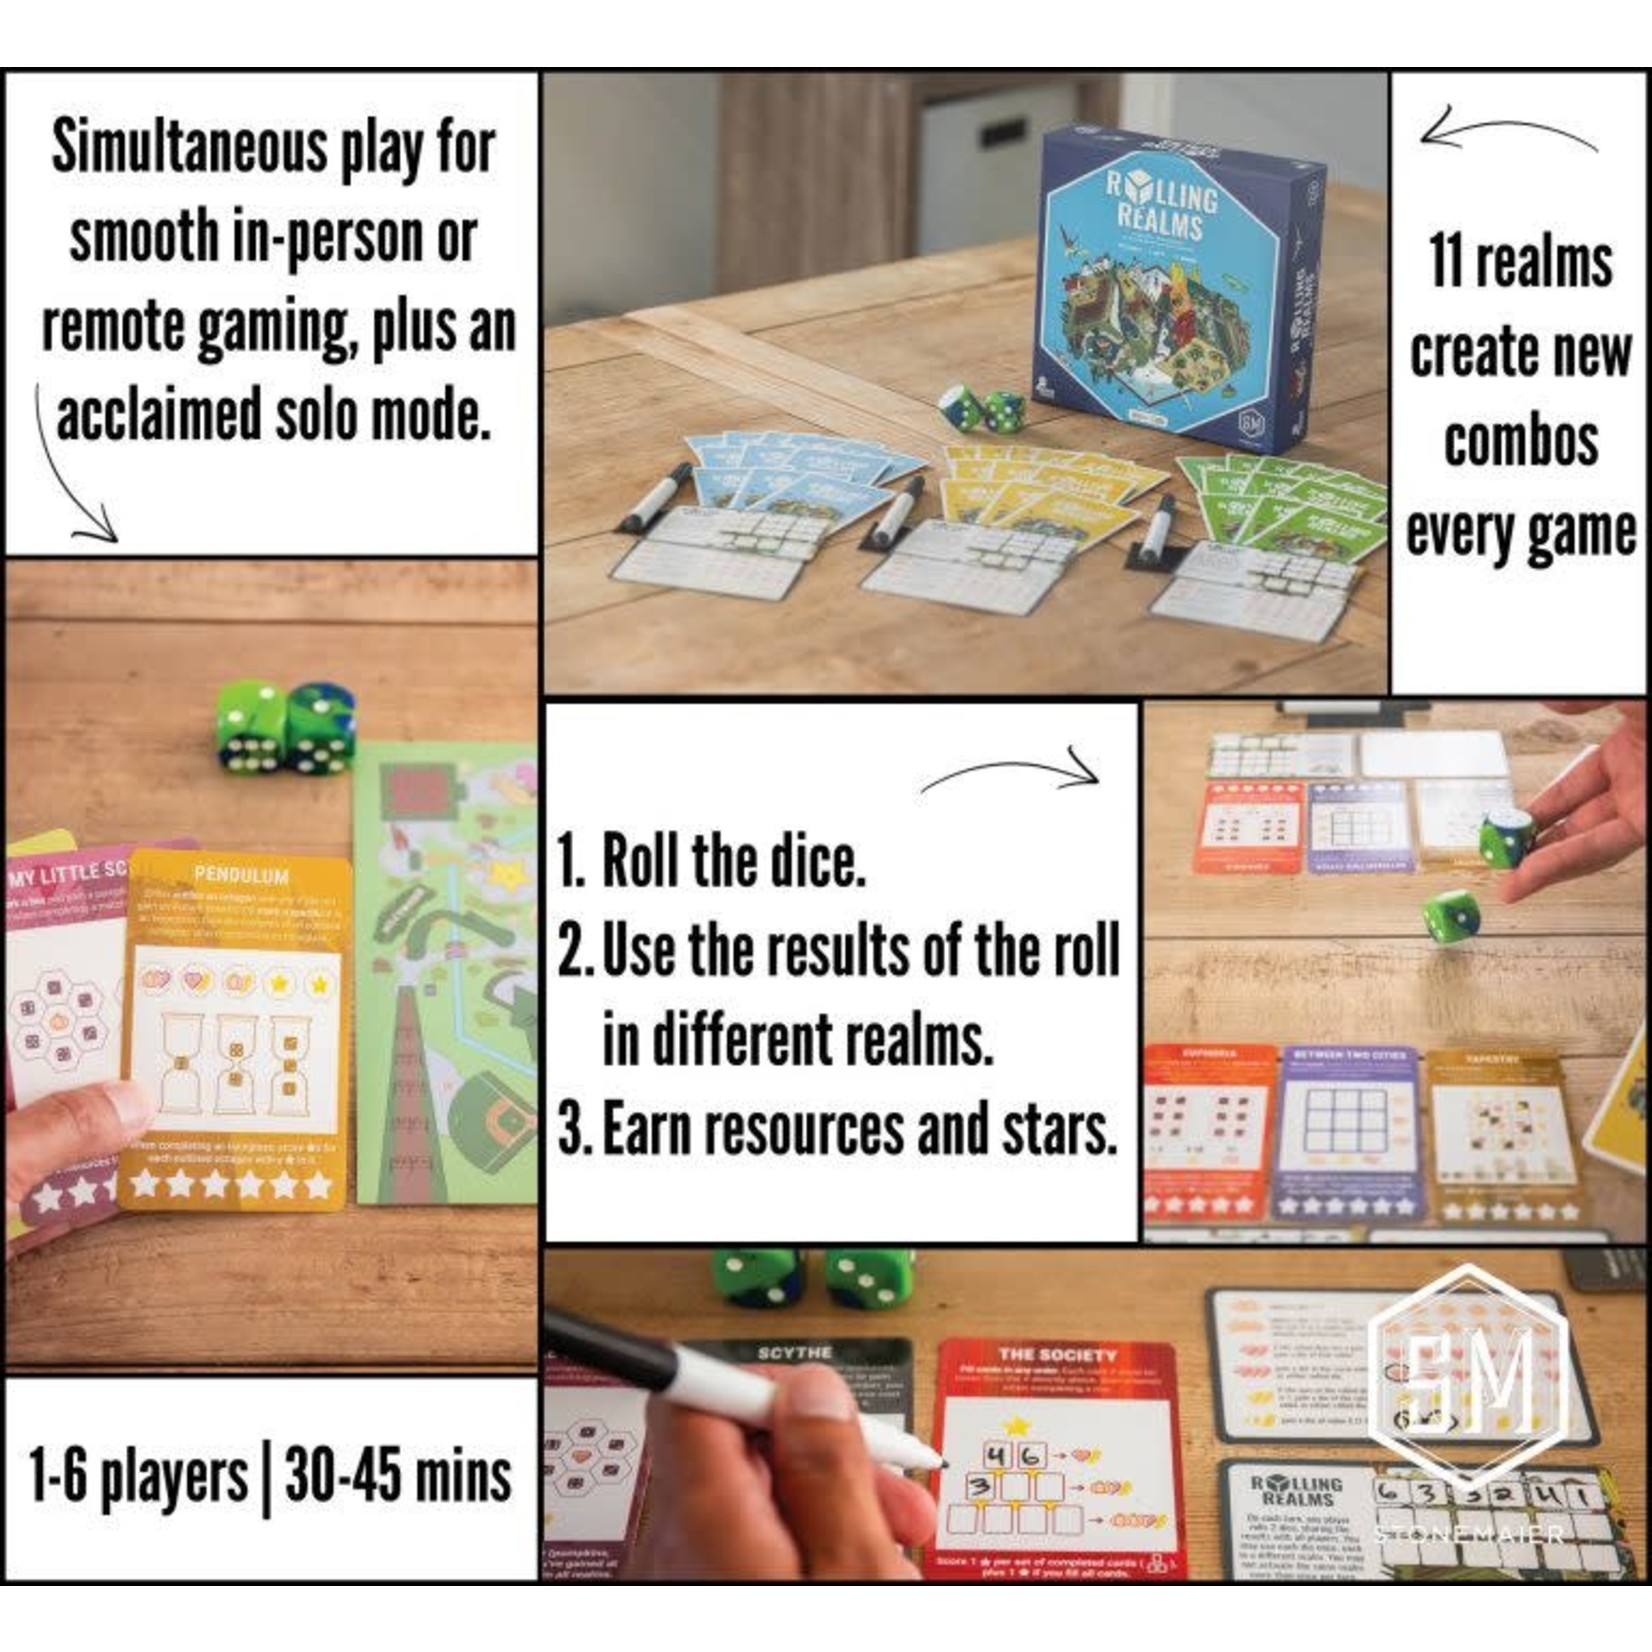 Stonemaier Games Rolling Realms